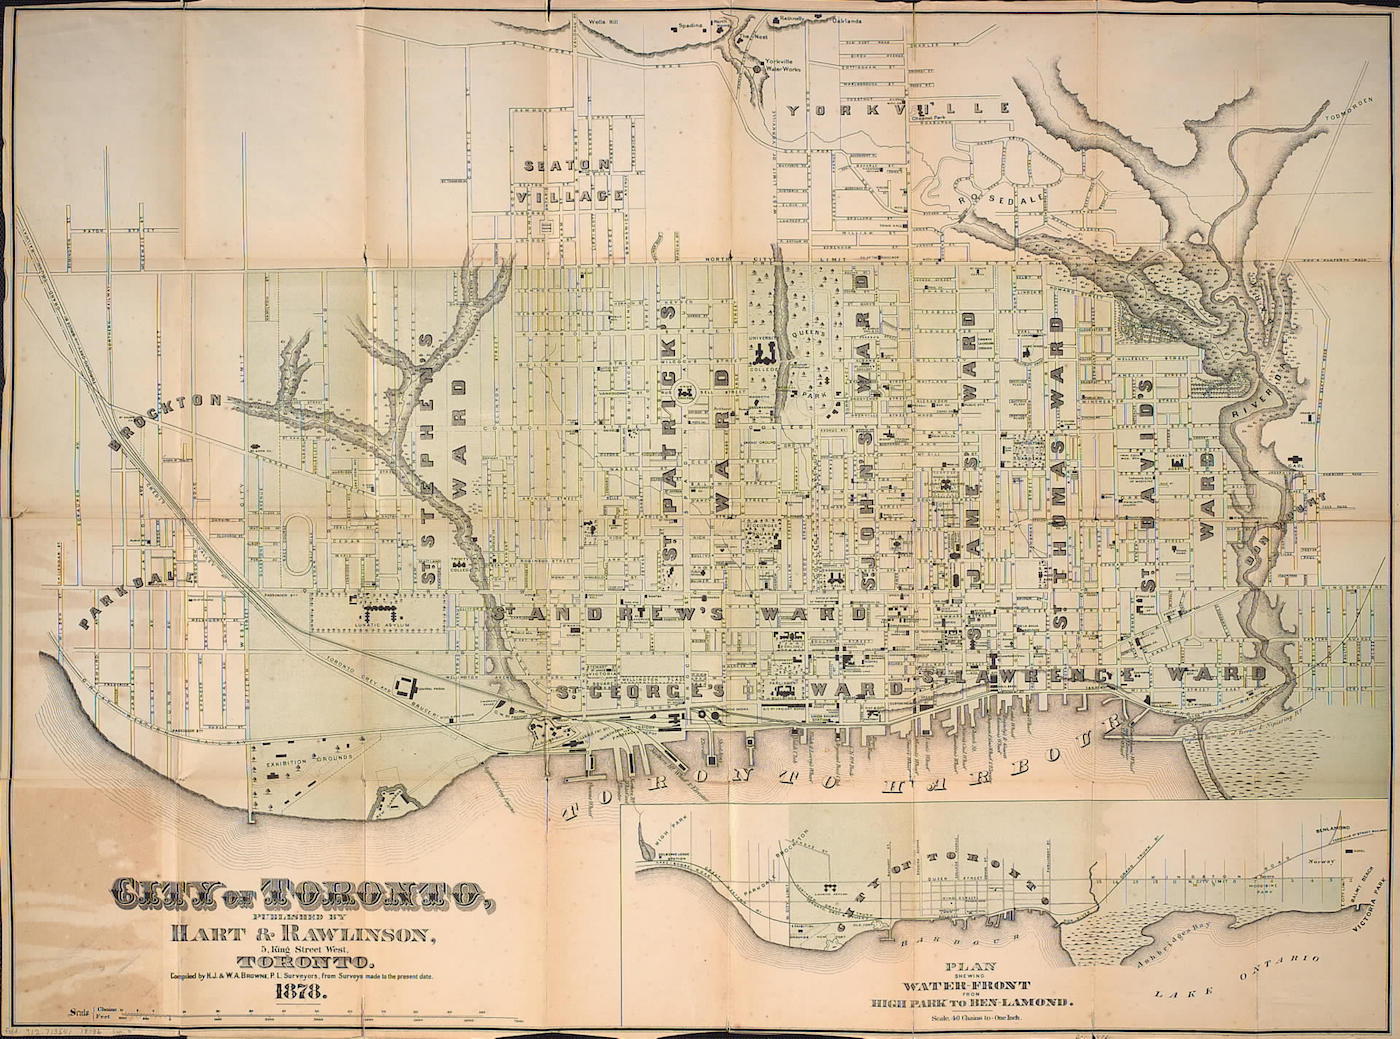 1878 - Hart & Rawlinson's Map of the City of Toronto, with Suburbs of Yorkville, Parkdale, Seaton Village, Brockton, and Ben-Lamond